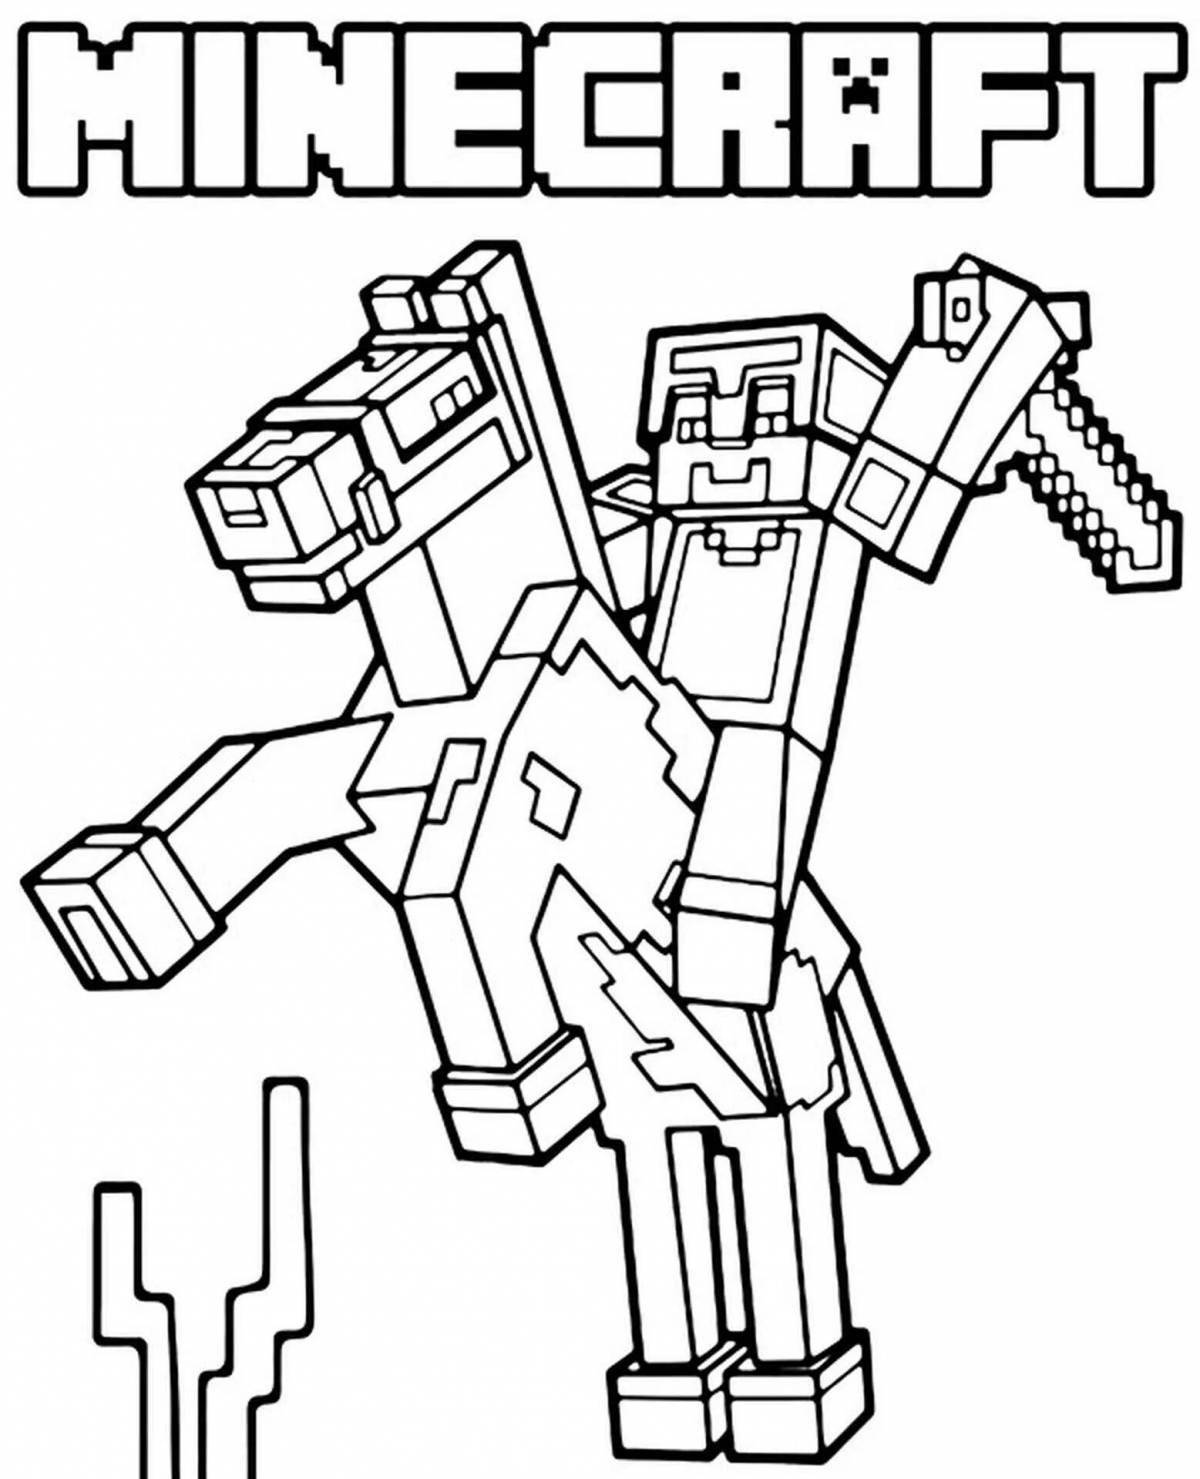 Colorful minecraft armor coloring page